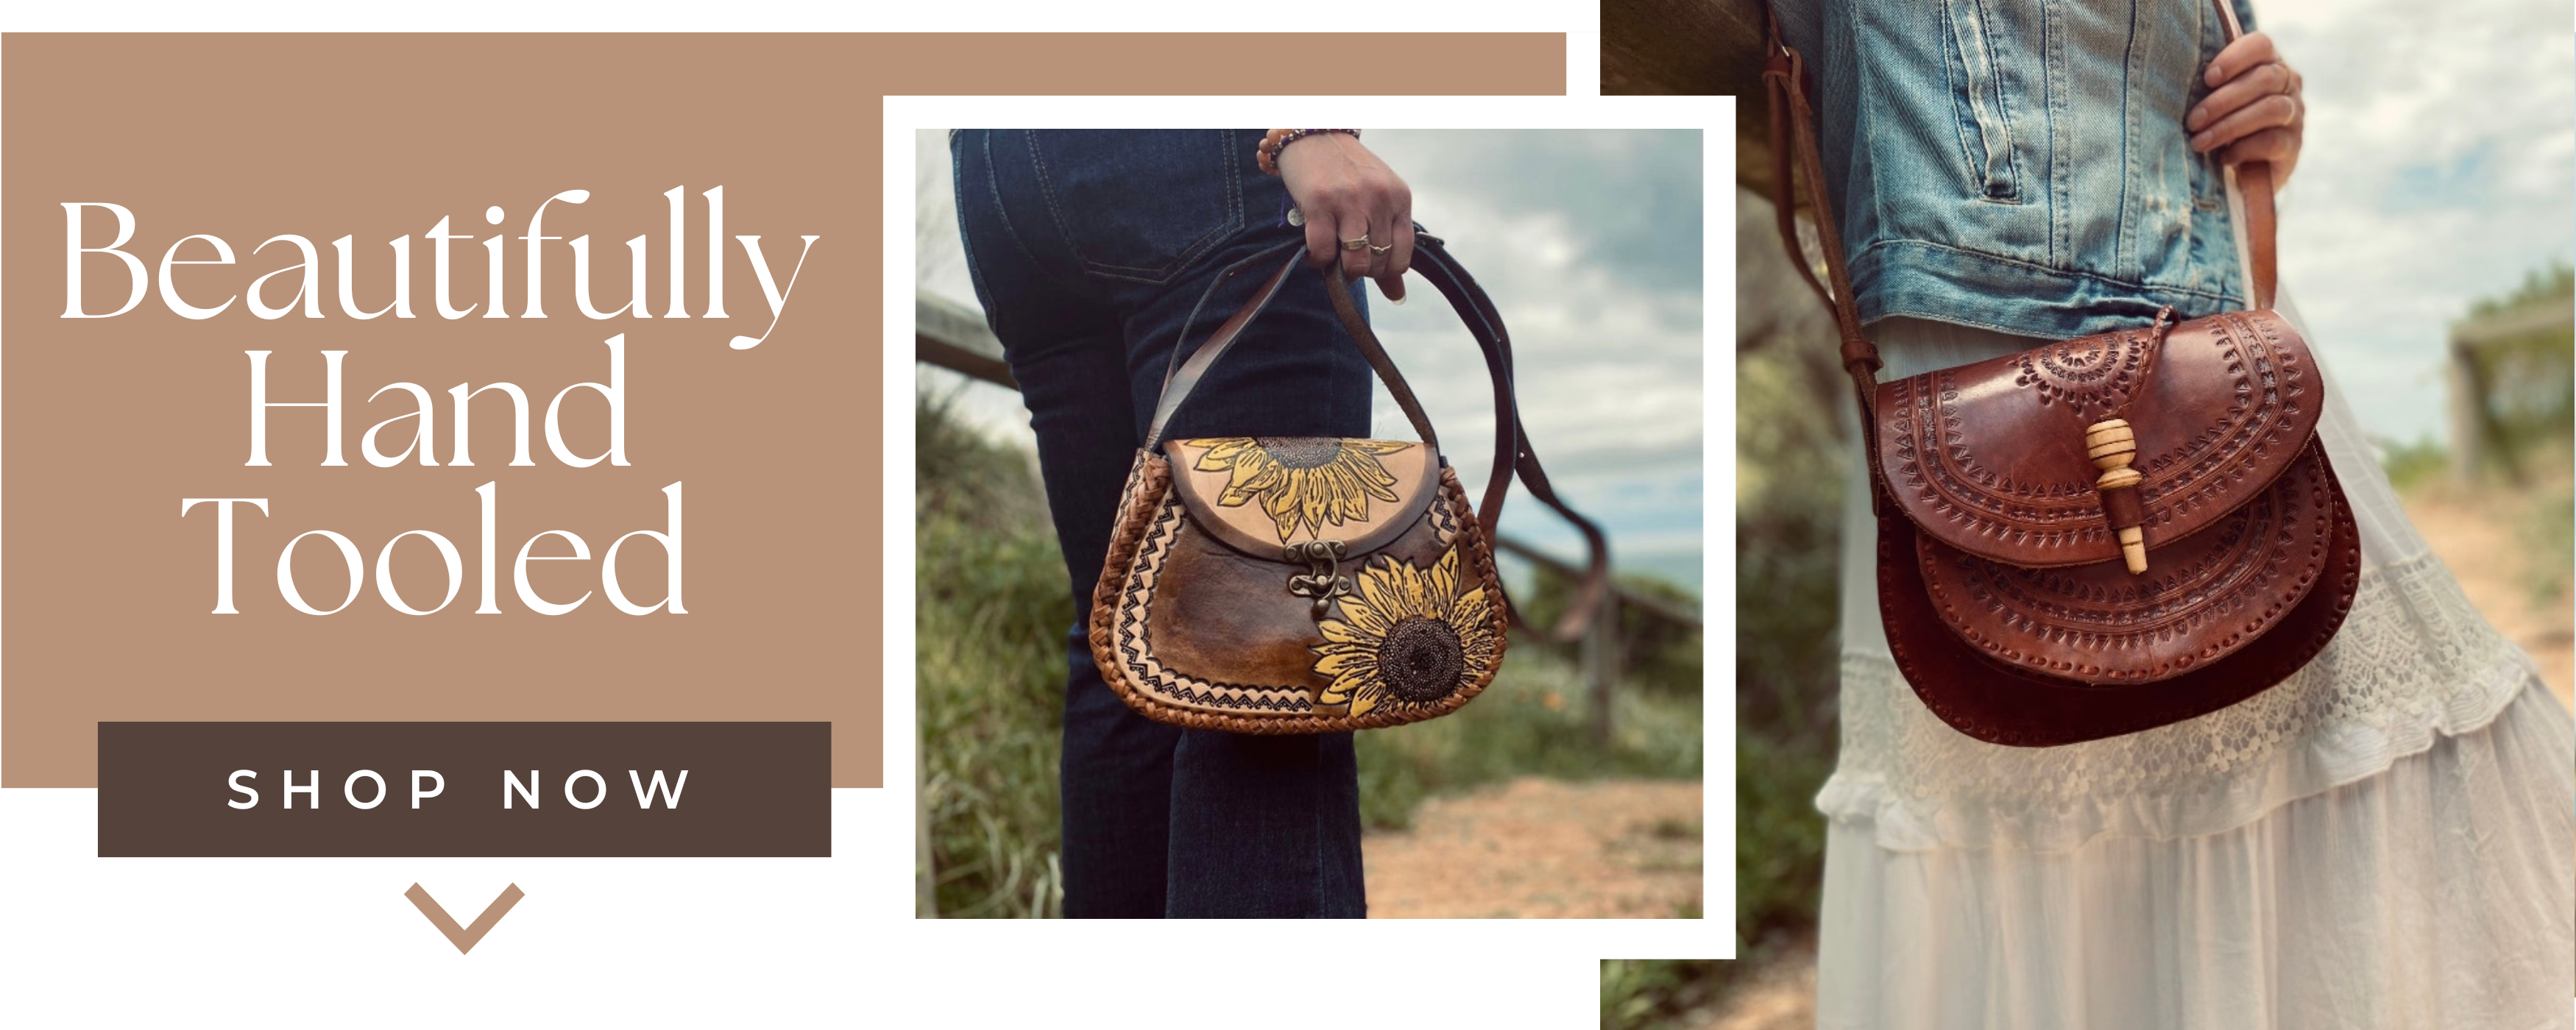 Buy Women's Leather Bags Online - Designed in Australia | Page 3 | The Horse